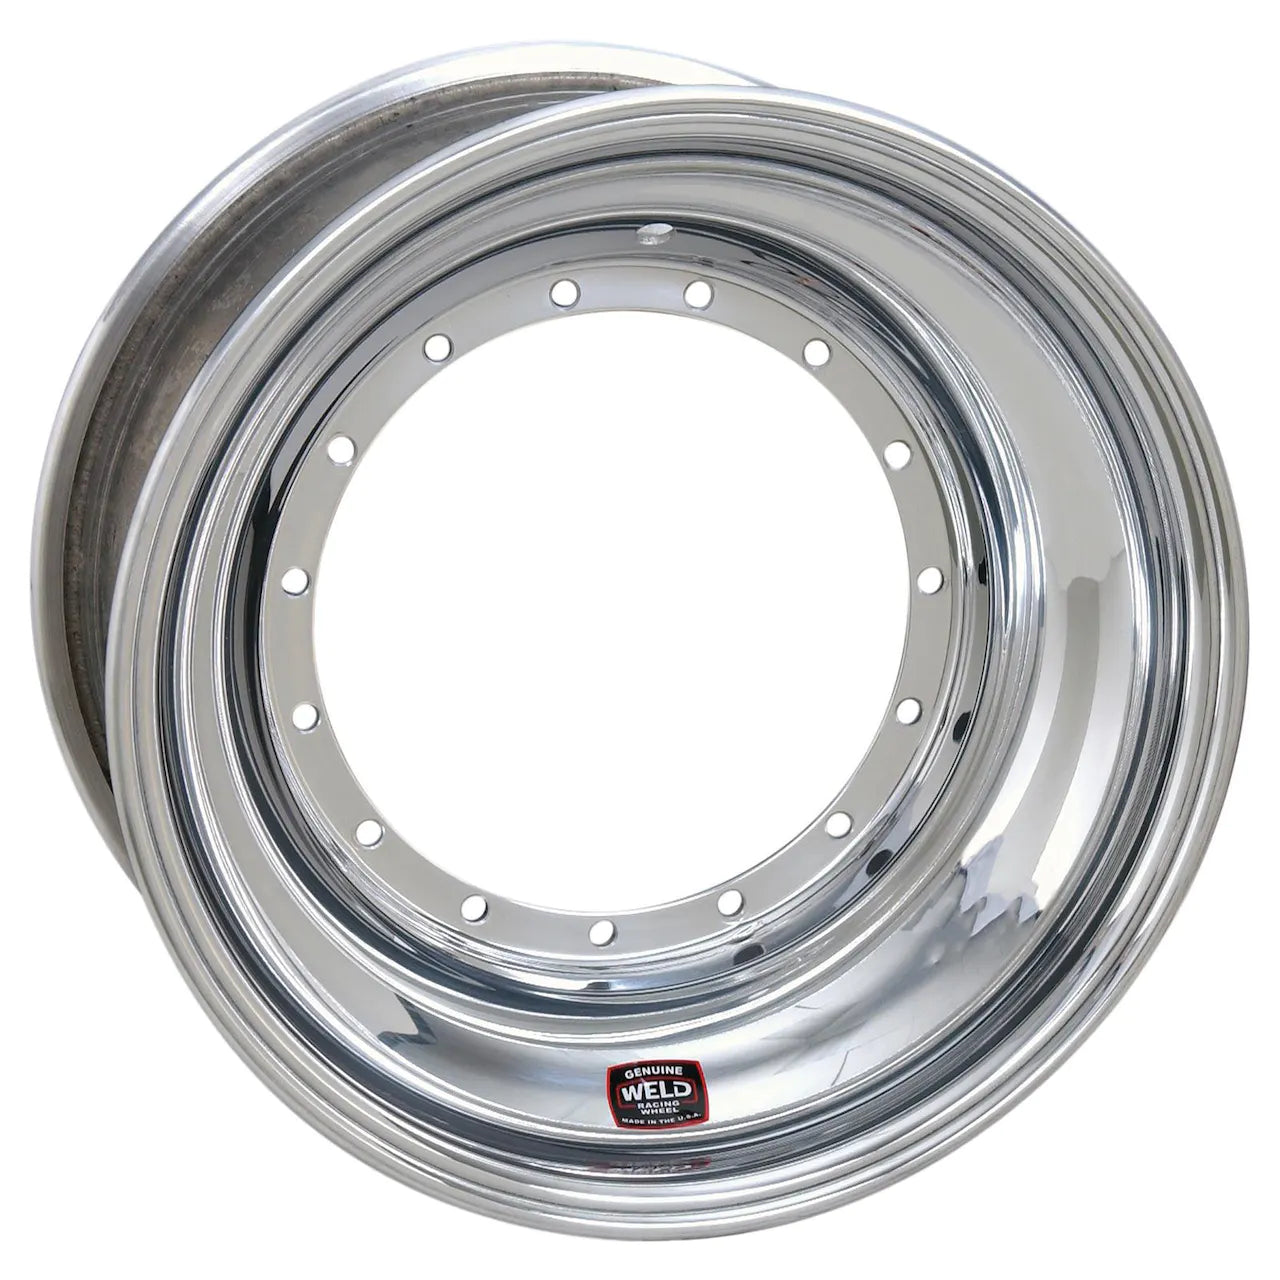 Weld Front Wheel Direct Mount 15" x 9" x 3" No lock - Polished